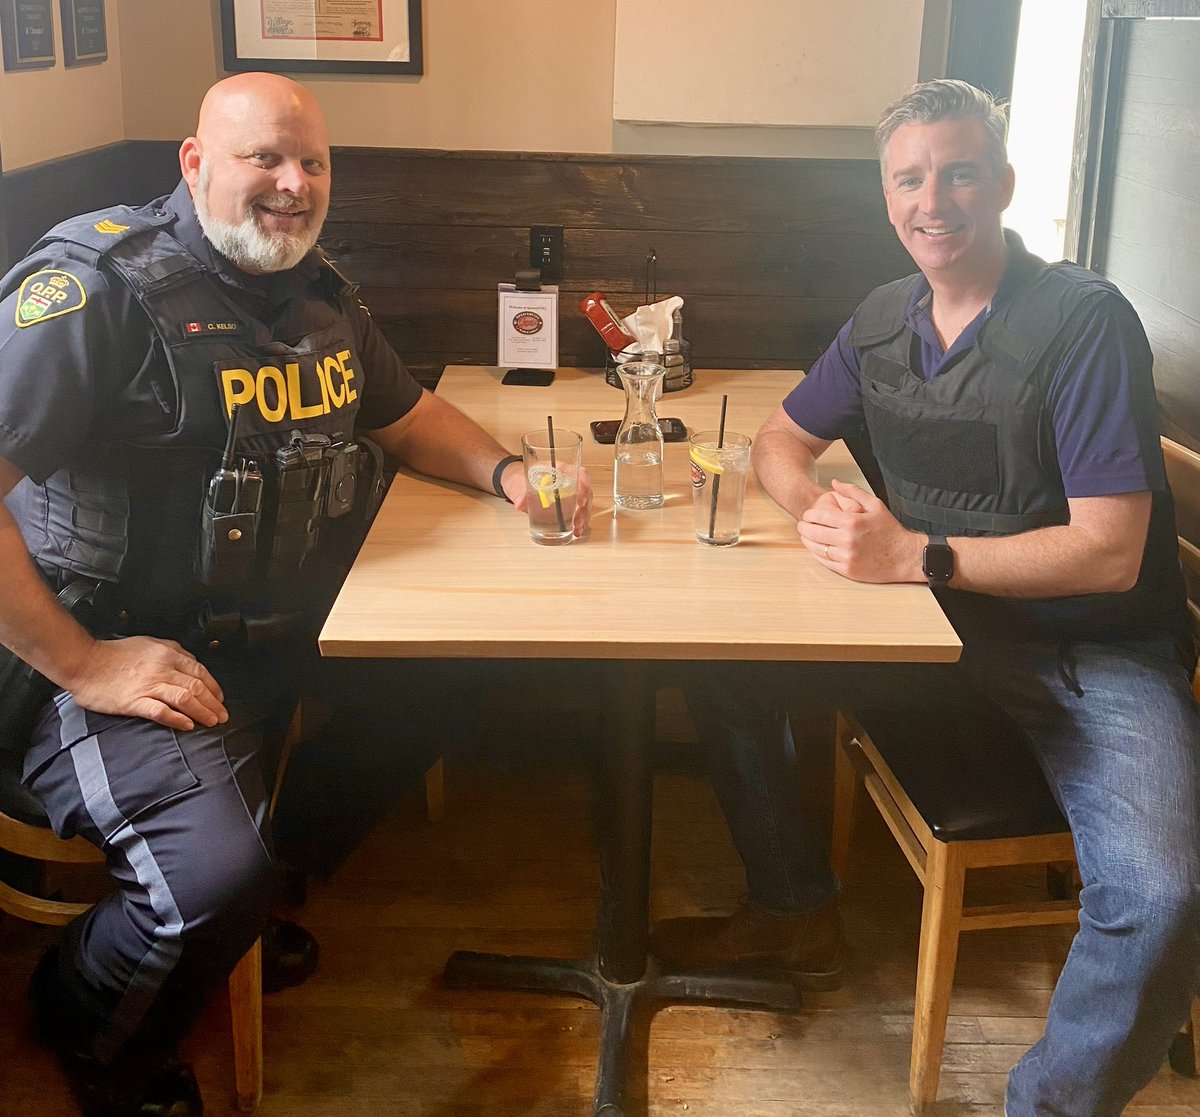 #GrenvilleOPP had a visit today from our local MP @MikeBarrettON to celebrate and talk about #PoliceWeekON. MP Barrett joined Sgt. Kelso for a tour of our #community and to learn more about our day-to-day tasks. He even joined us for some proactive foot patrol! ^dh